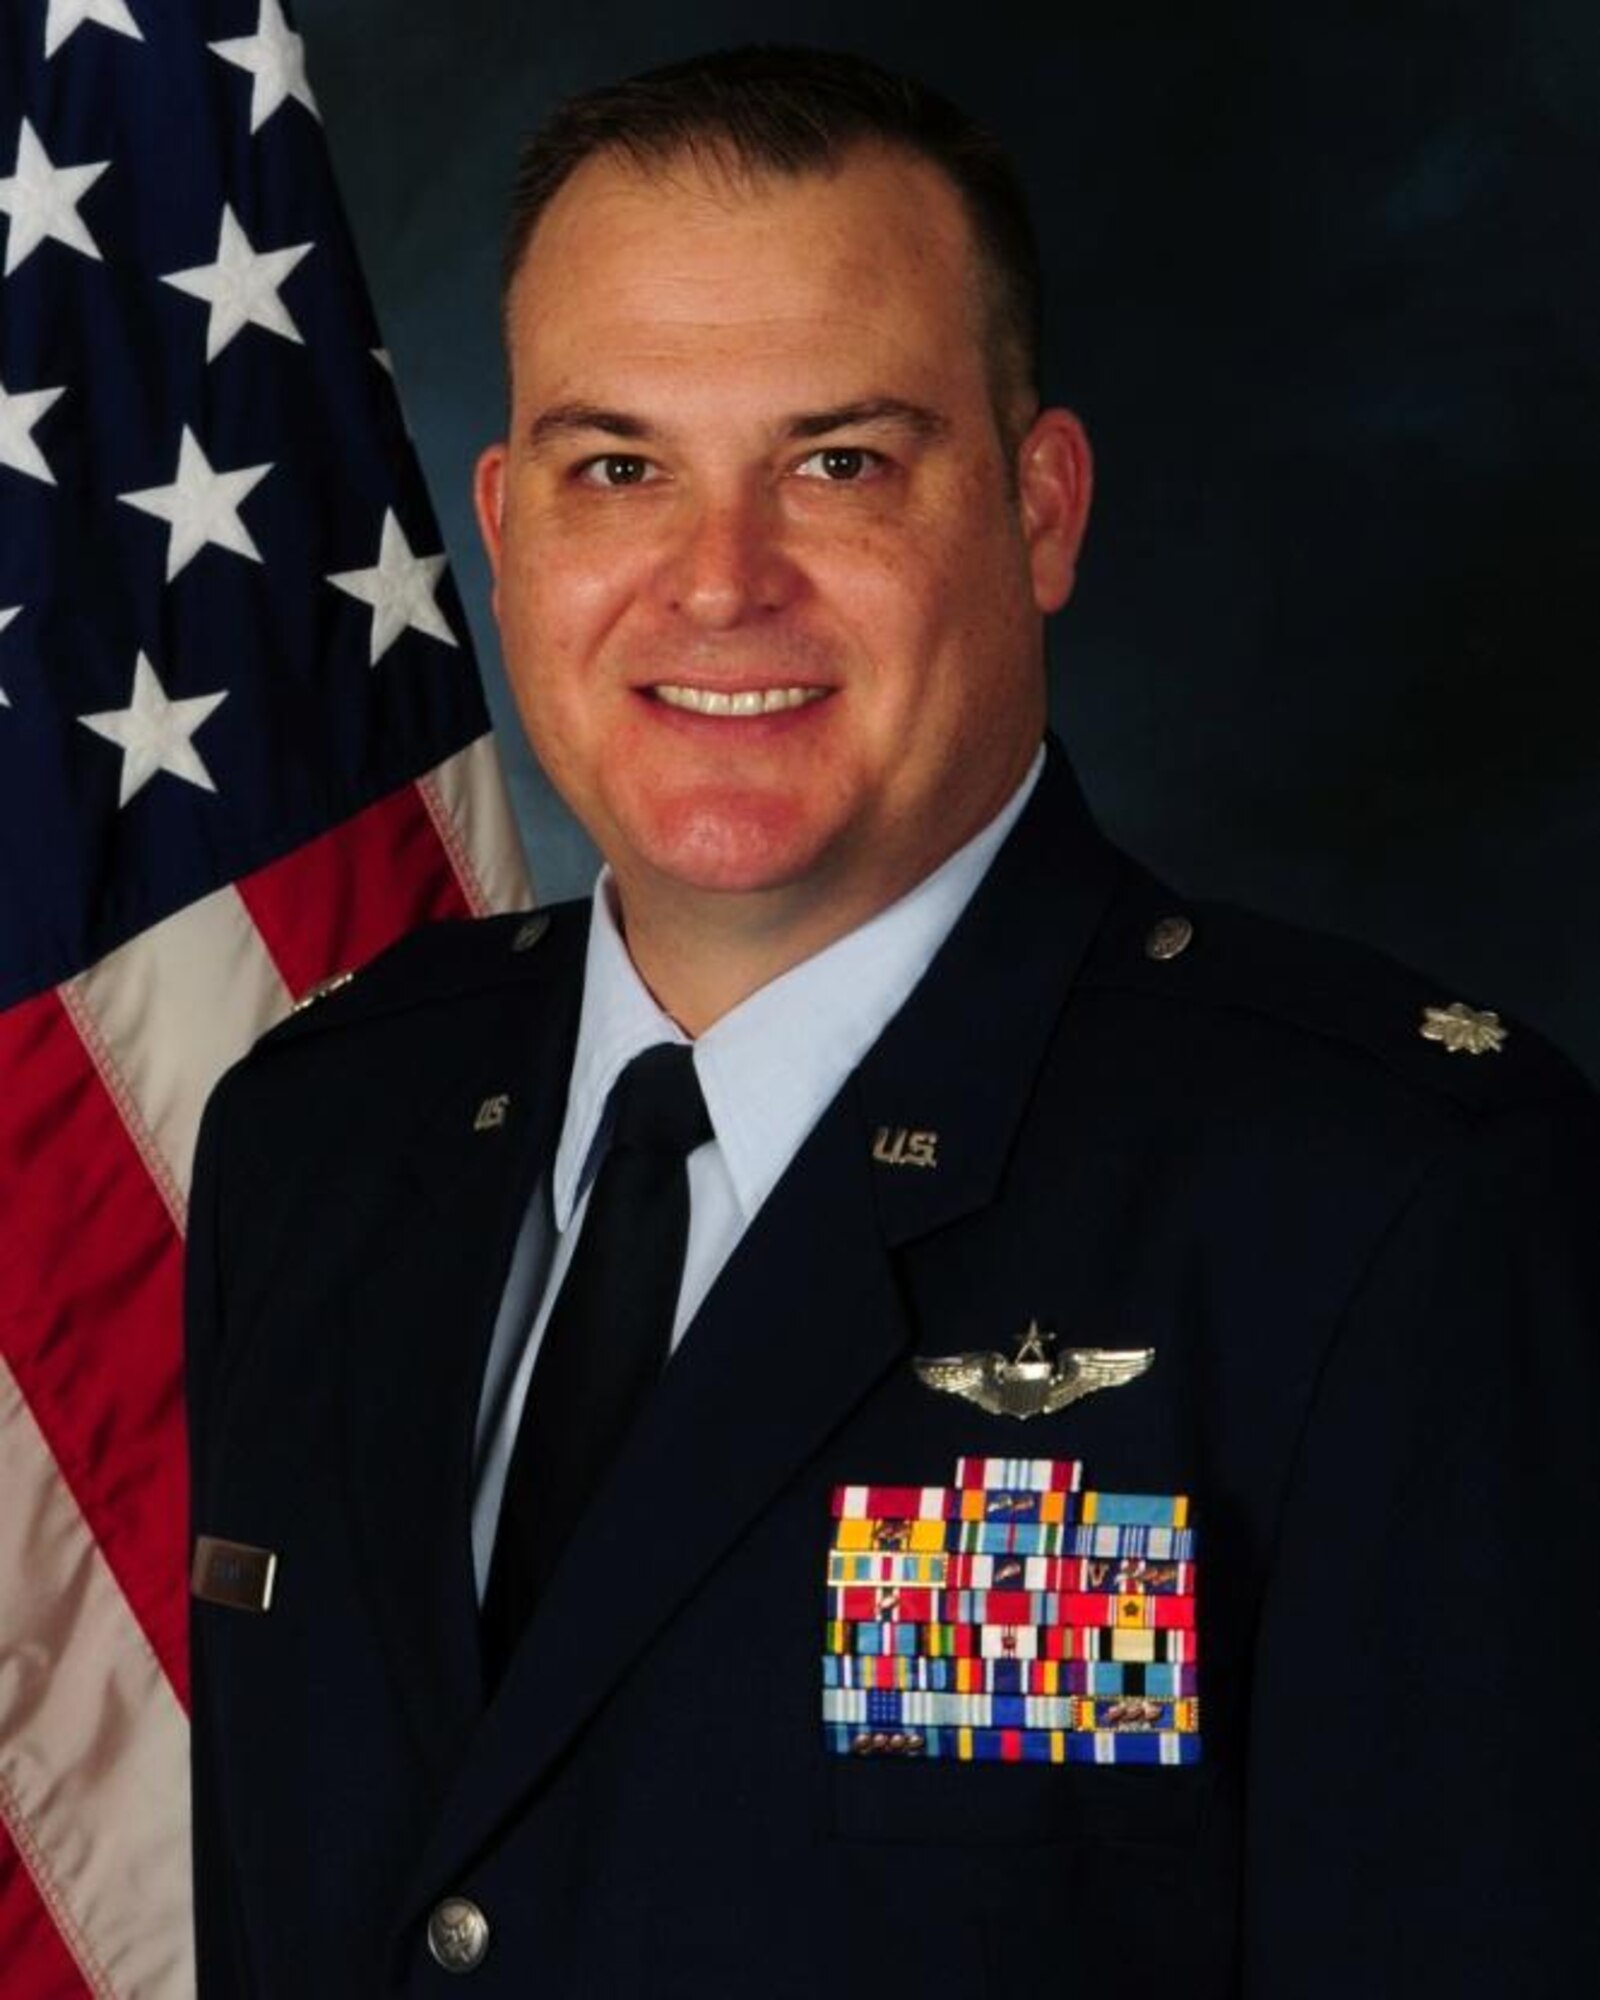 Lt. Col. Michael Black is the 36th Mobility Response Group commander. 

